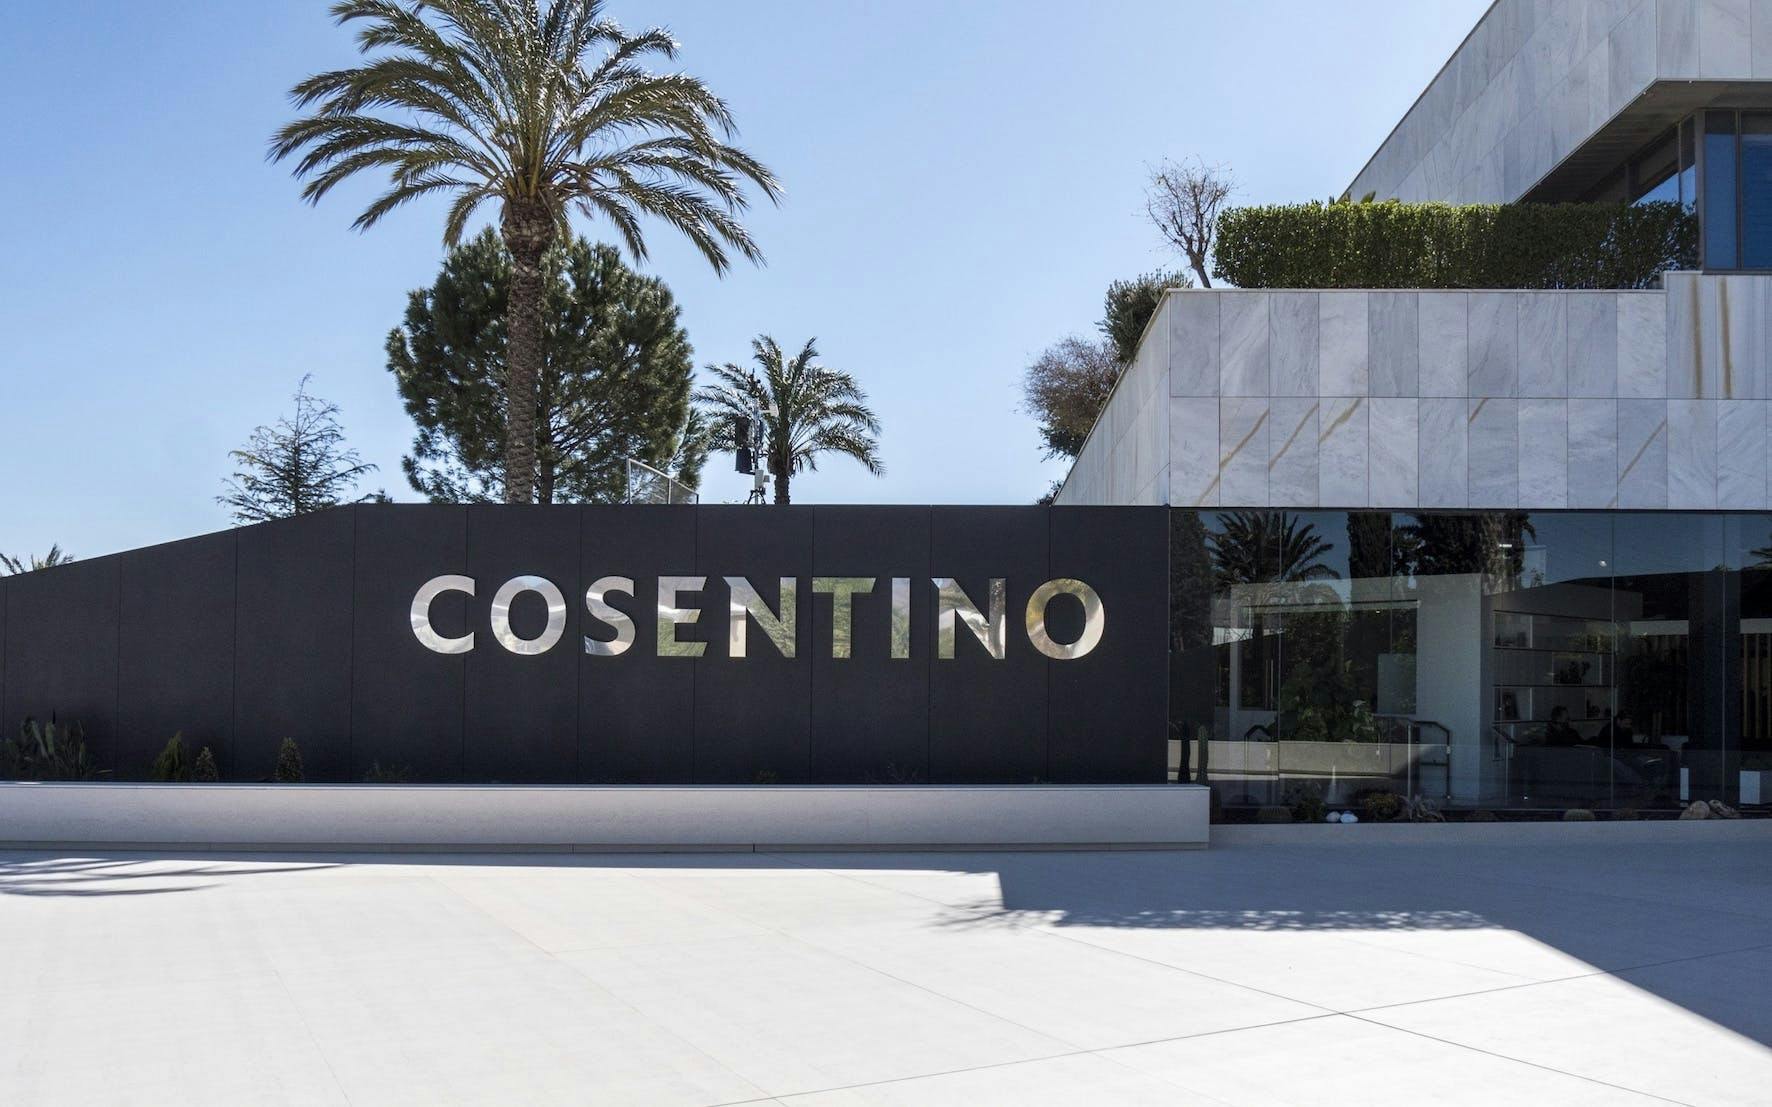 Image 31 of Entrada HQ Cosentino 3 4 in Cosentino Group restructures its Marketing and Comms area - Cosentino